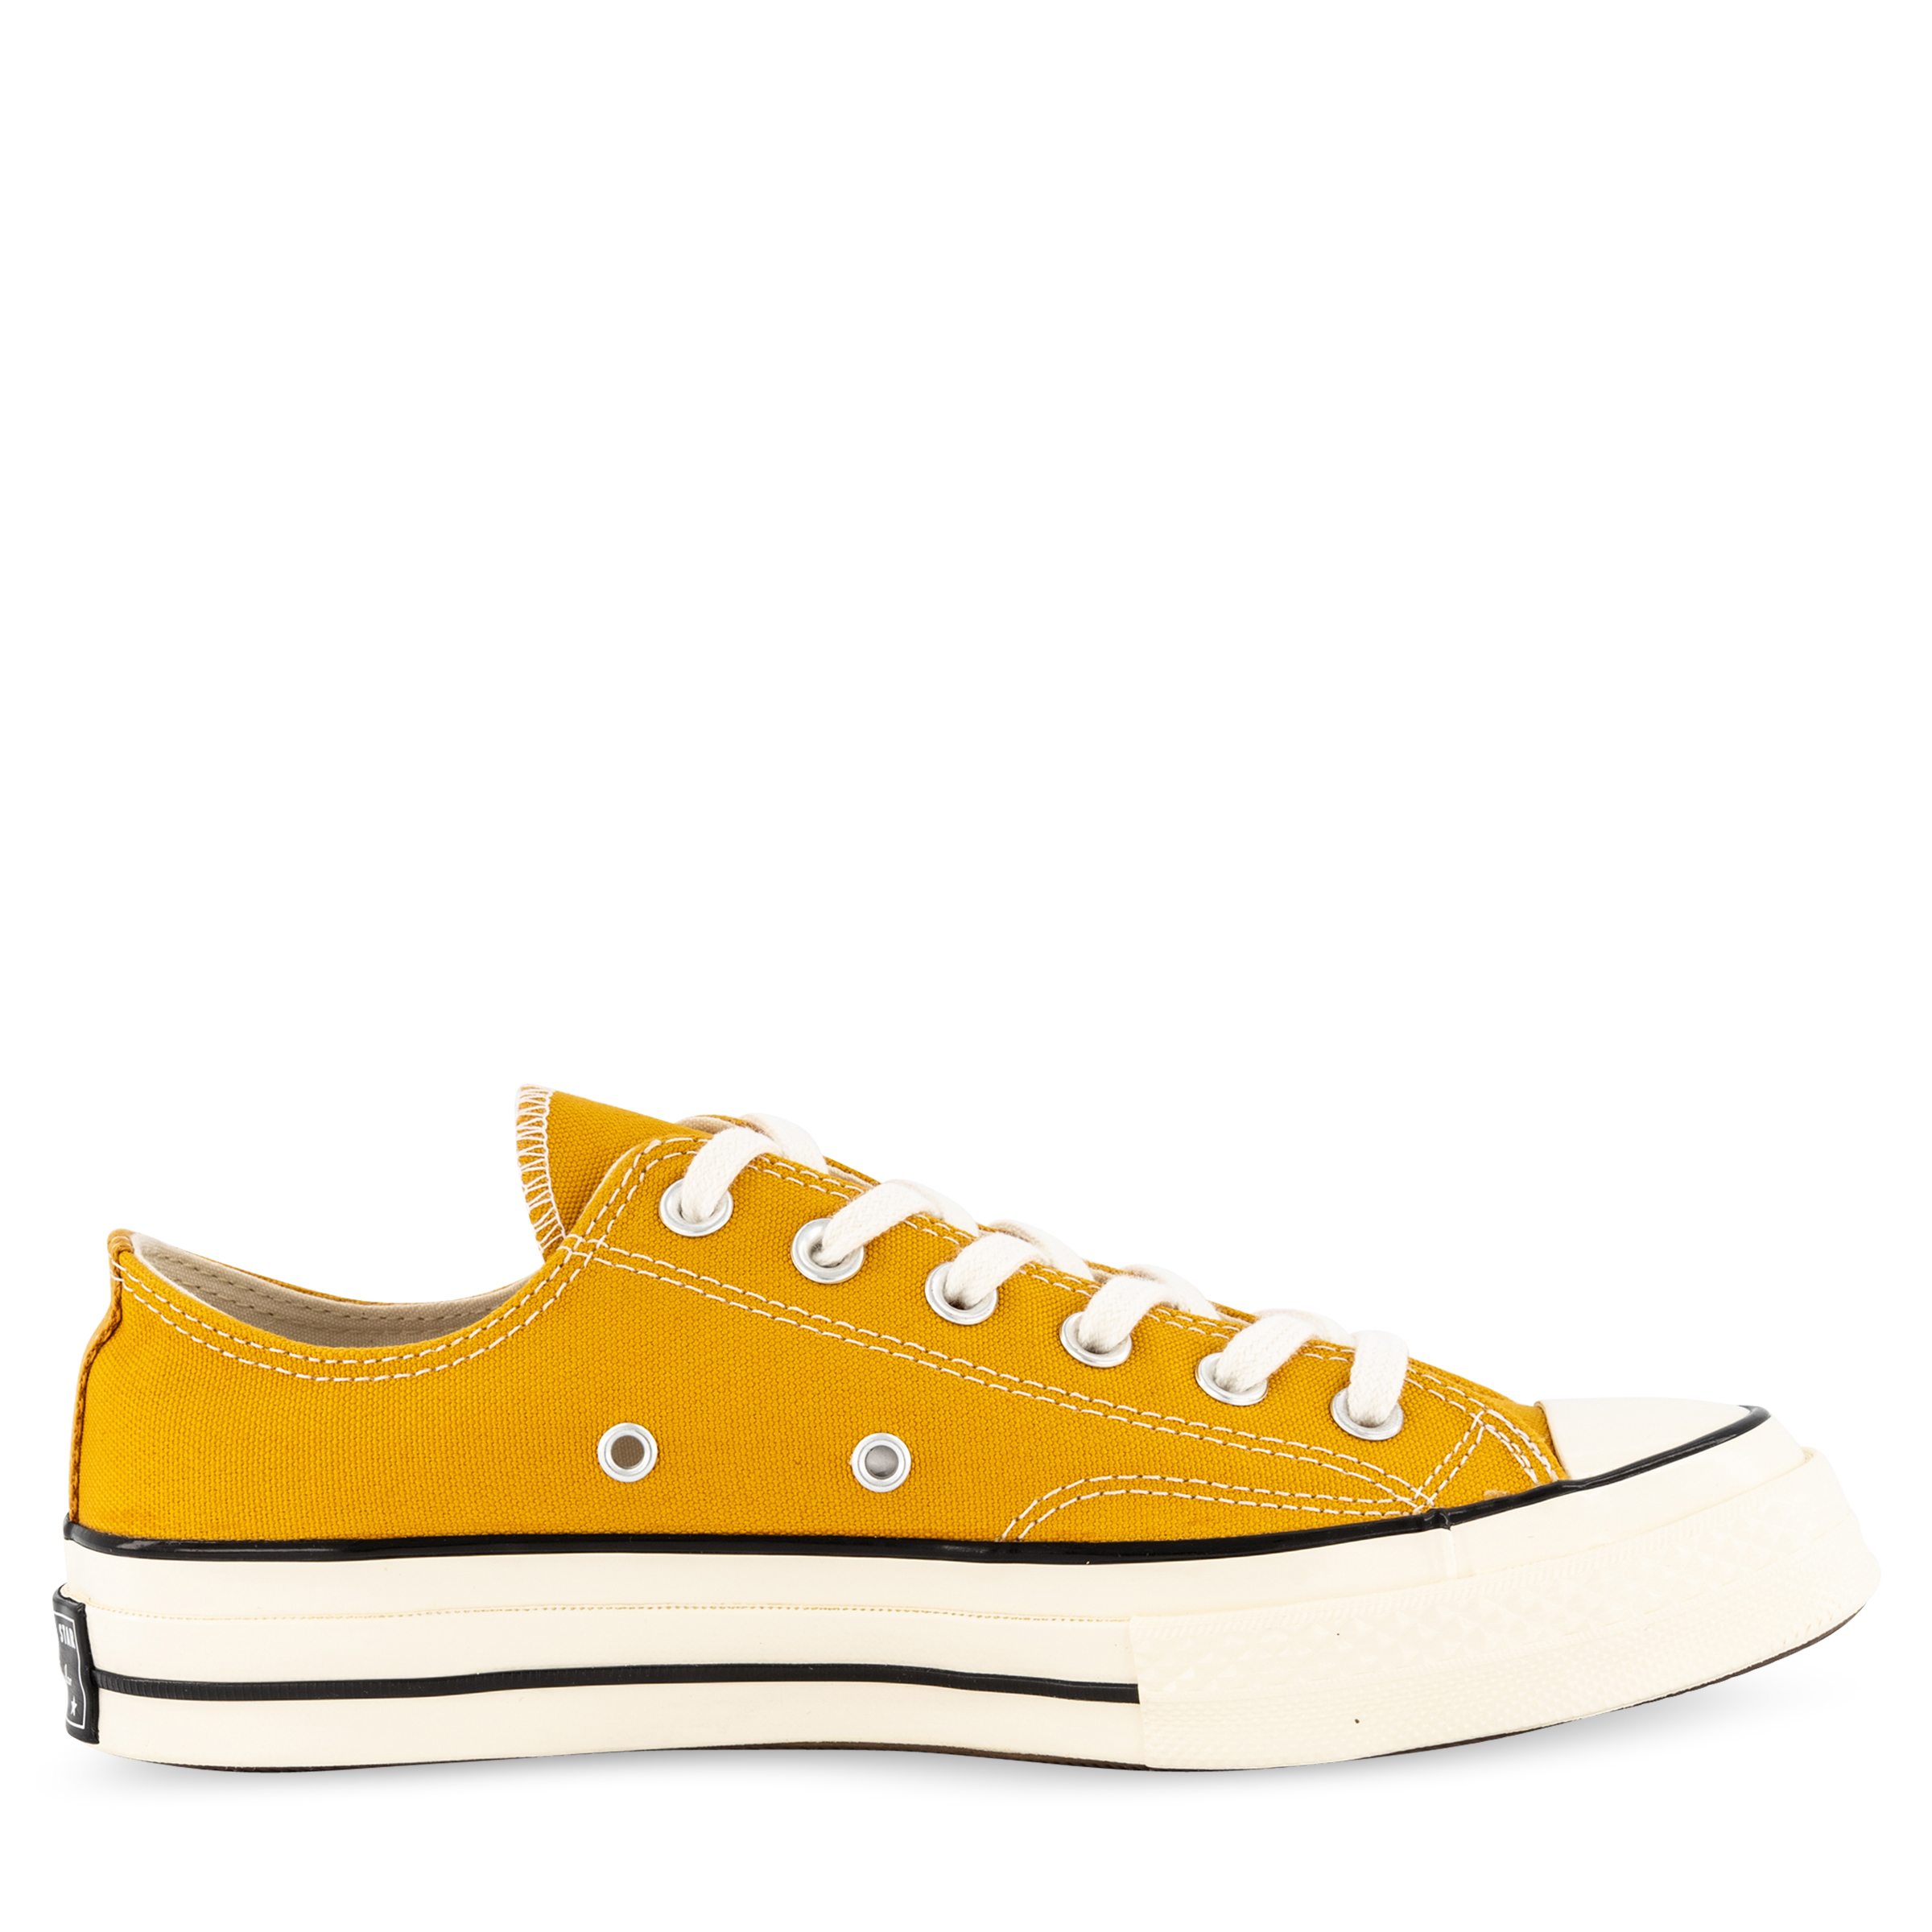 Converse CHUCK TAYLOR ALL STAR 70 LOW Sunflower/Black/Egret | Hype DC